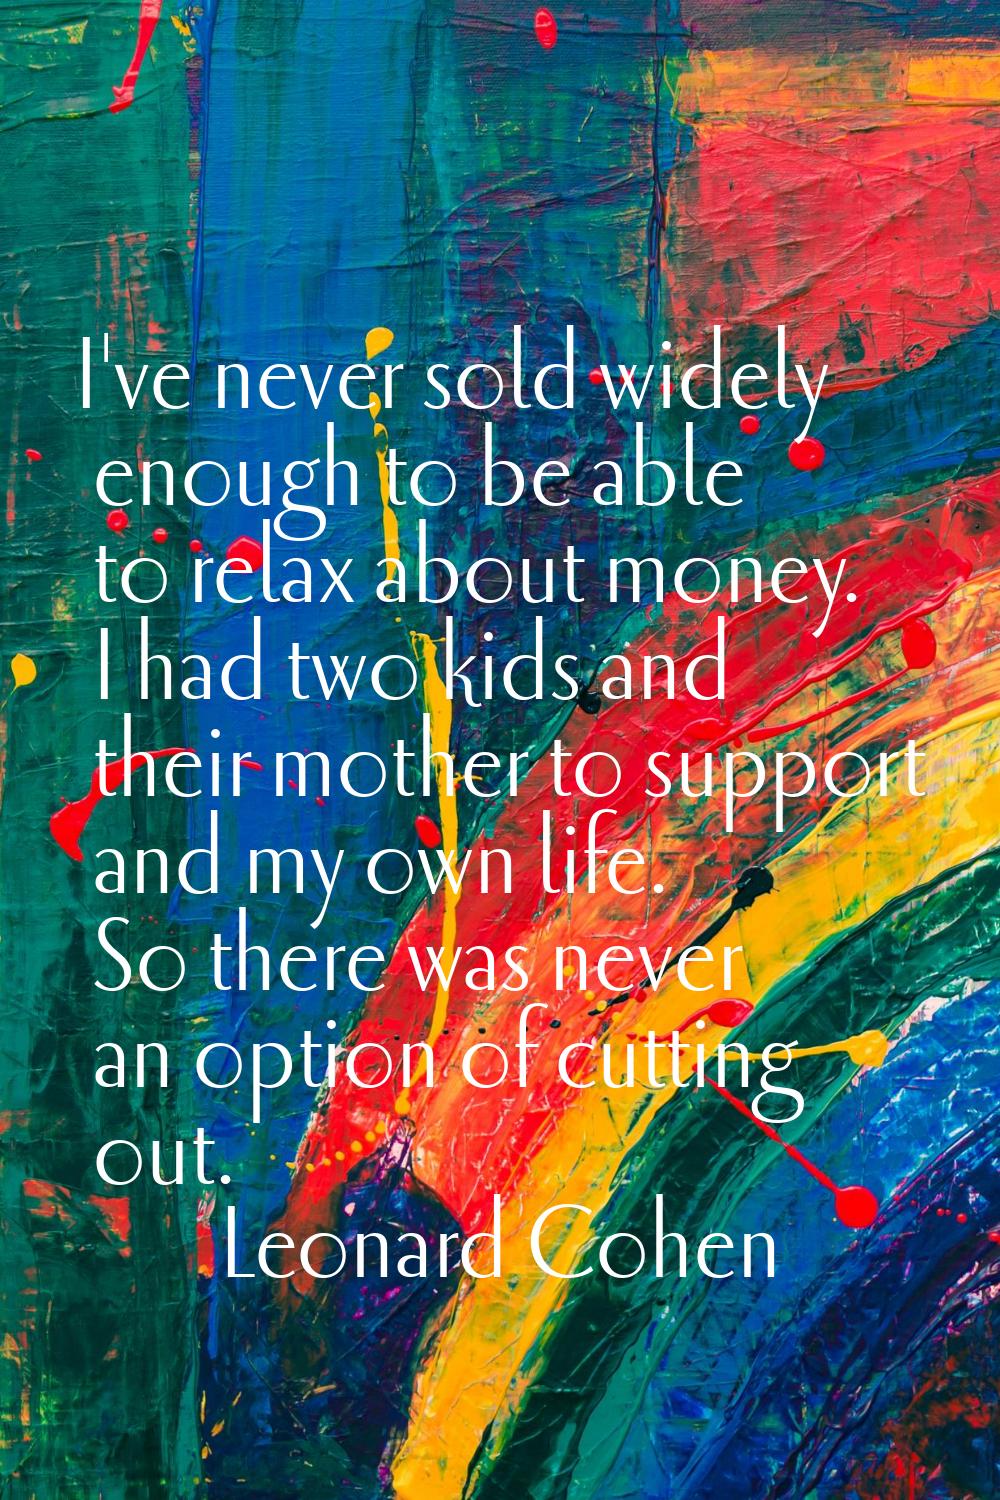 I've never sold widely enough to be able to relax about money. I had two kids and their mother to s